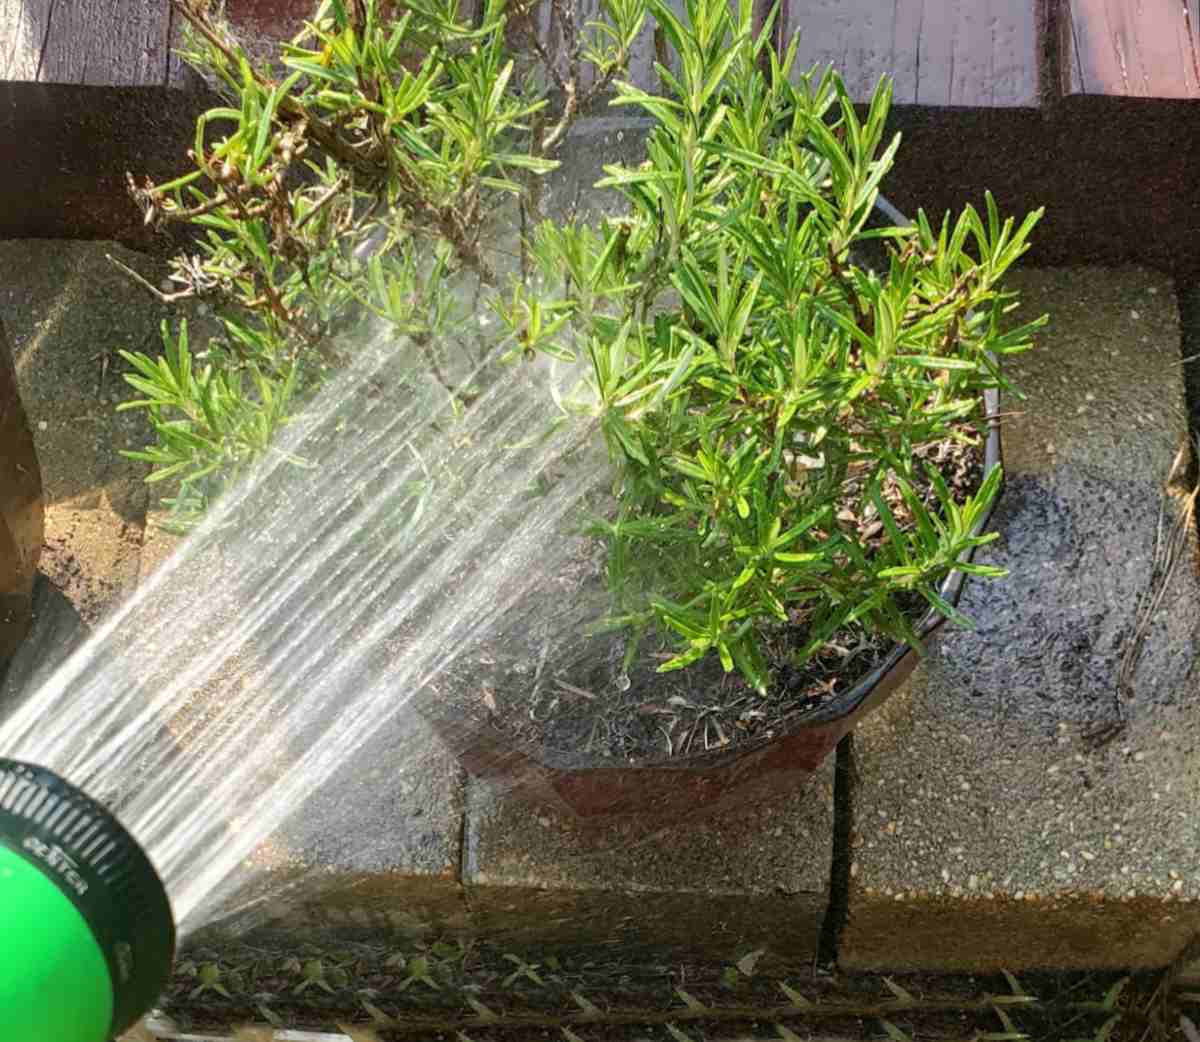 Watering a rosemary plant in a pot with a sprinker nozzle.